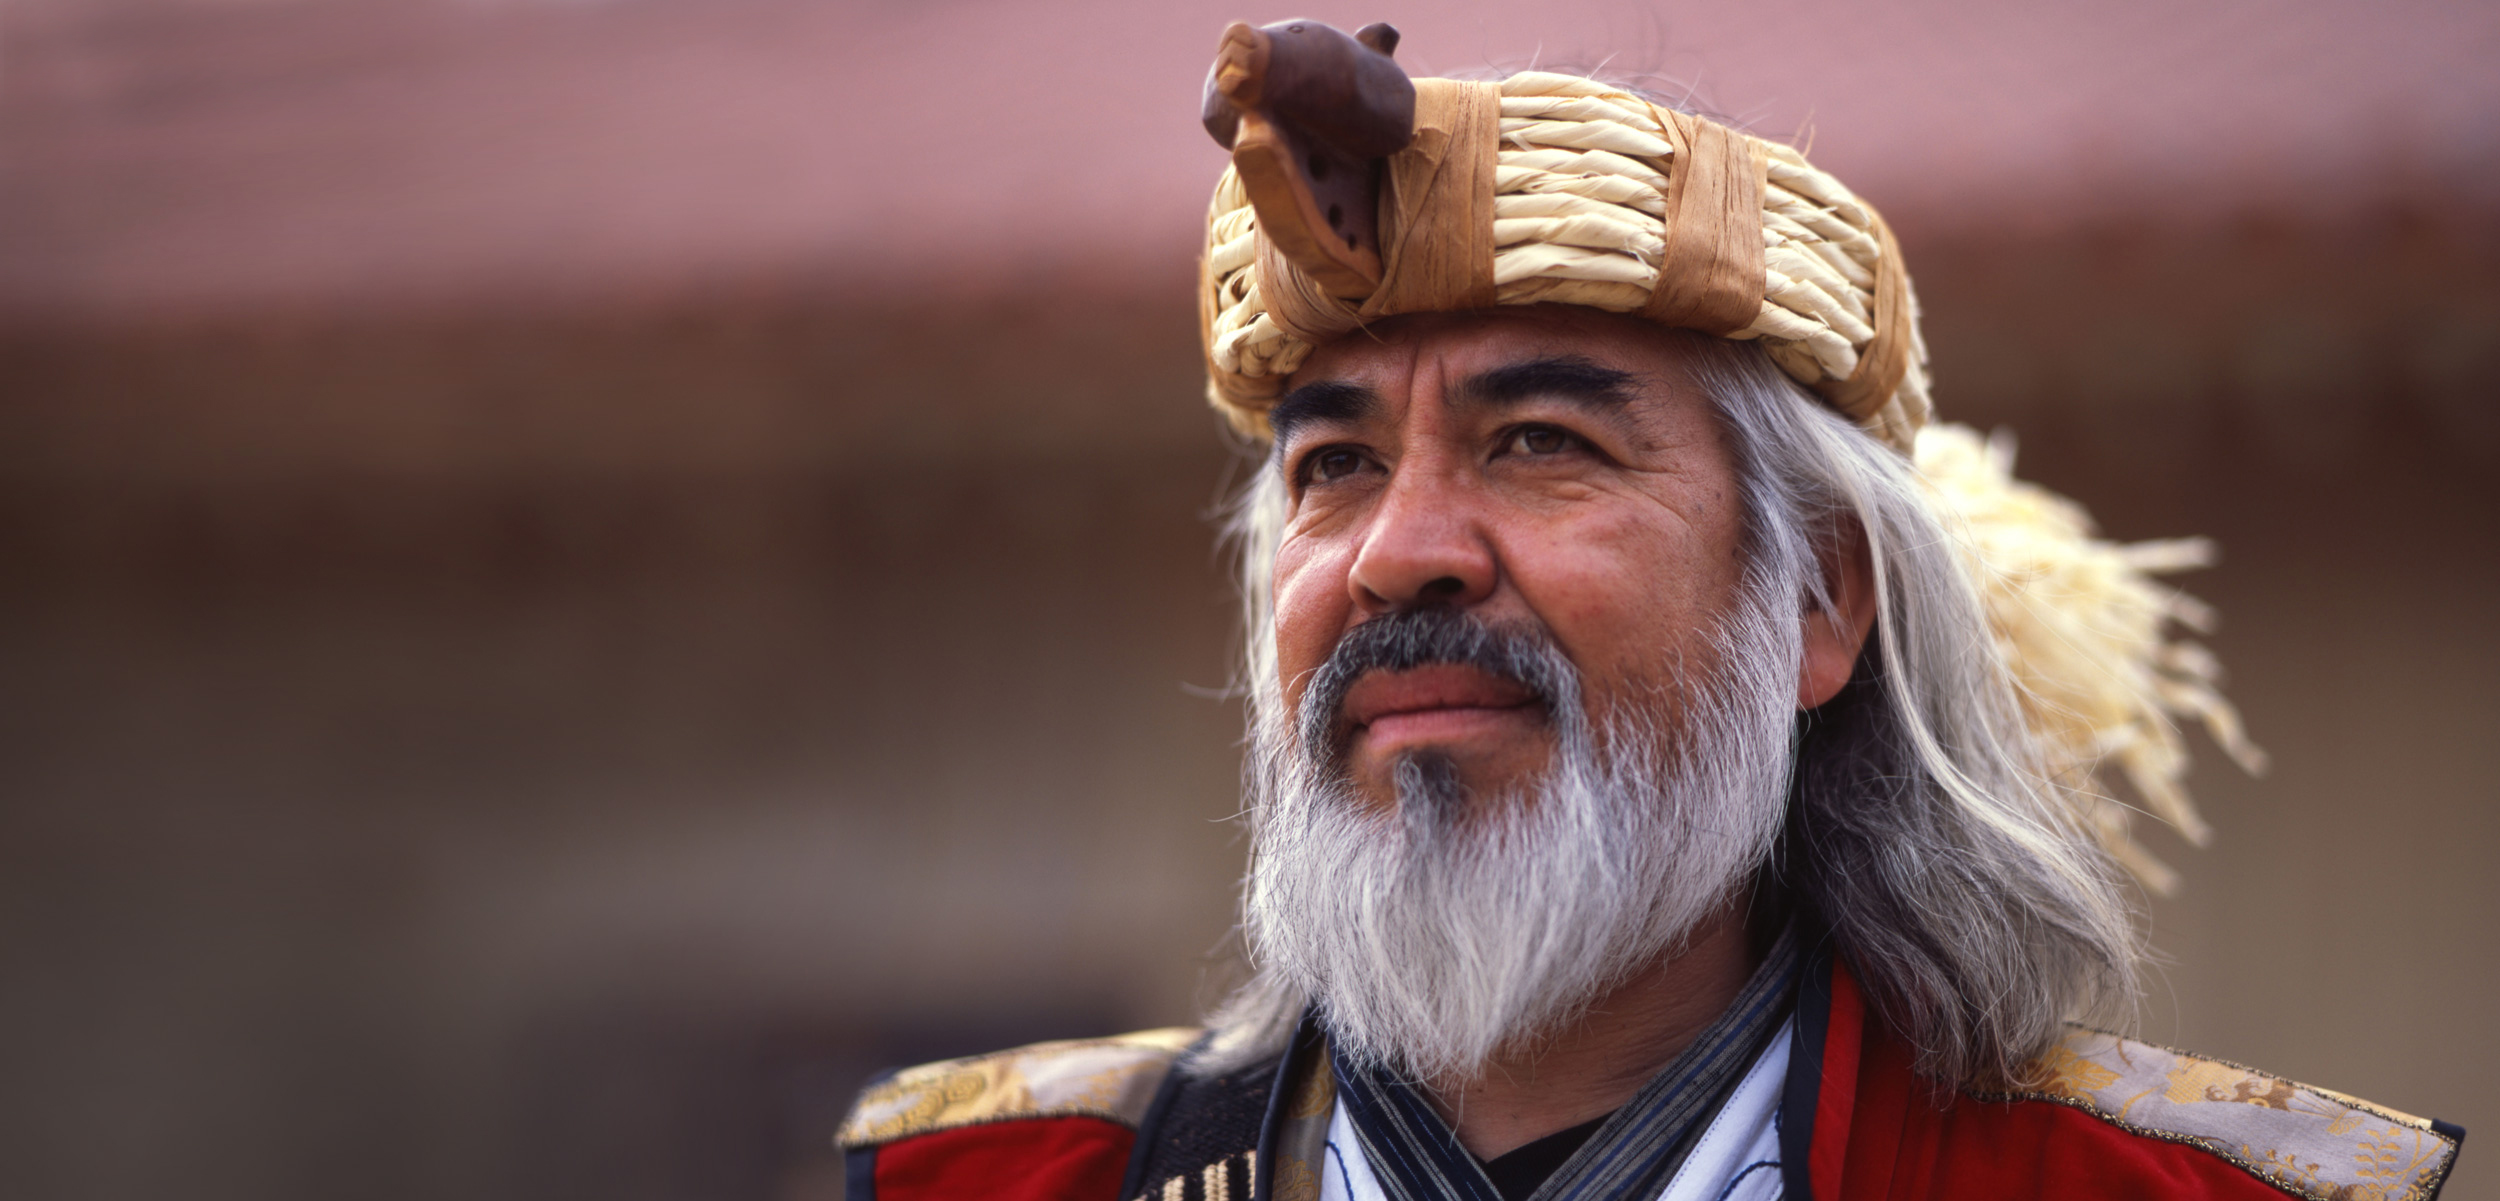 The Ainu, the Indigenous people of Japan, have fought Japanese domination for centuries. As this century unfolds, their efforts are finally paying off. Photo by Chris Willson/Alamy Stock Photo